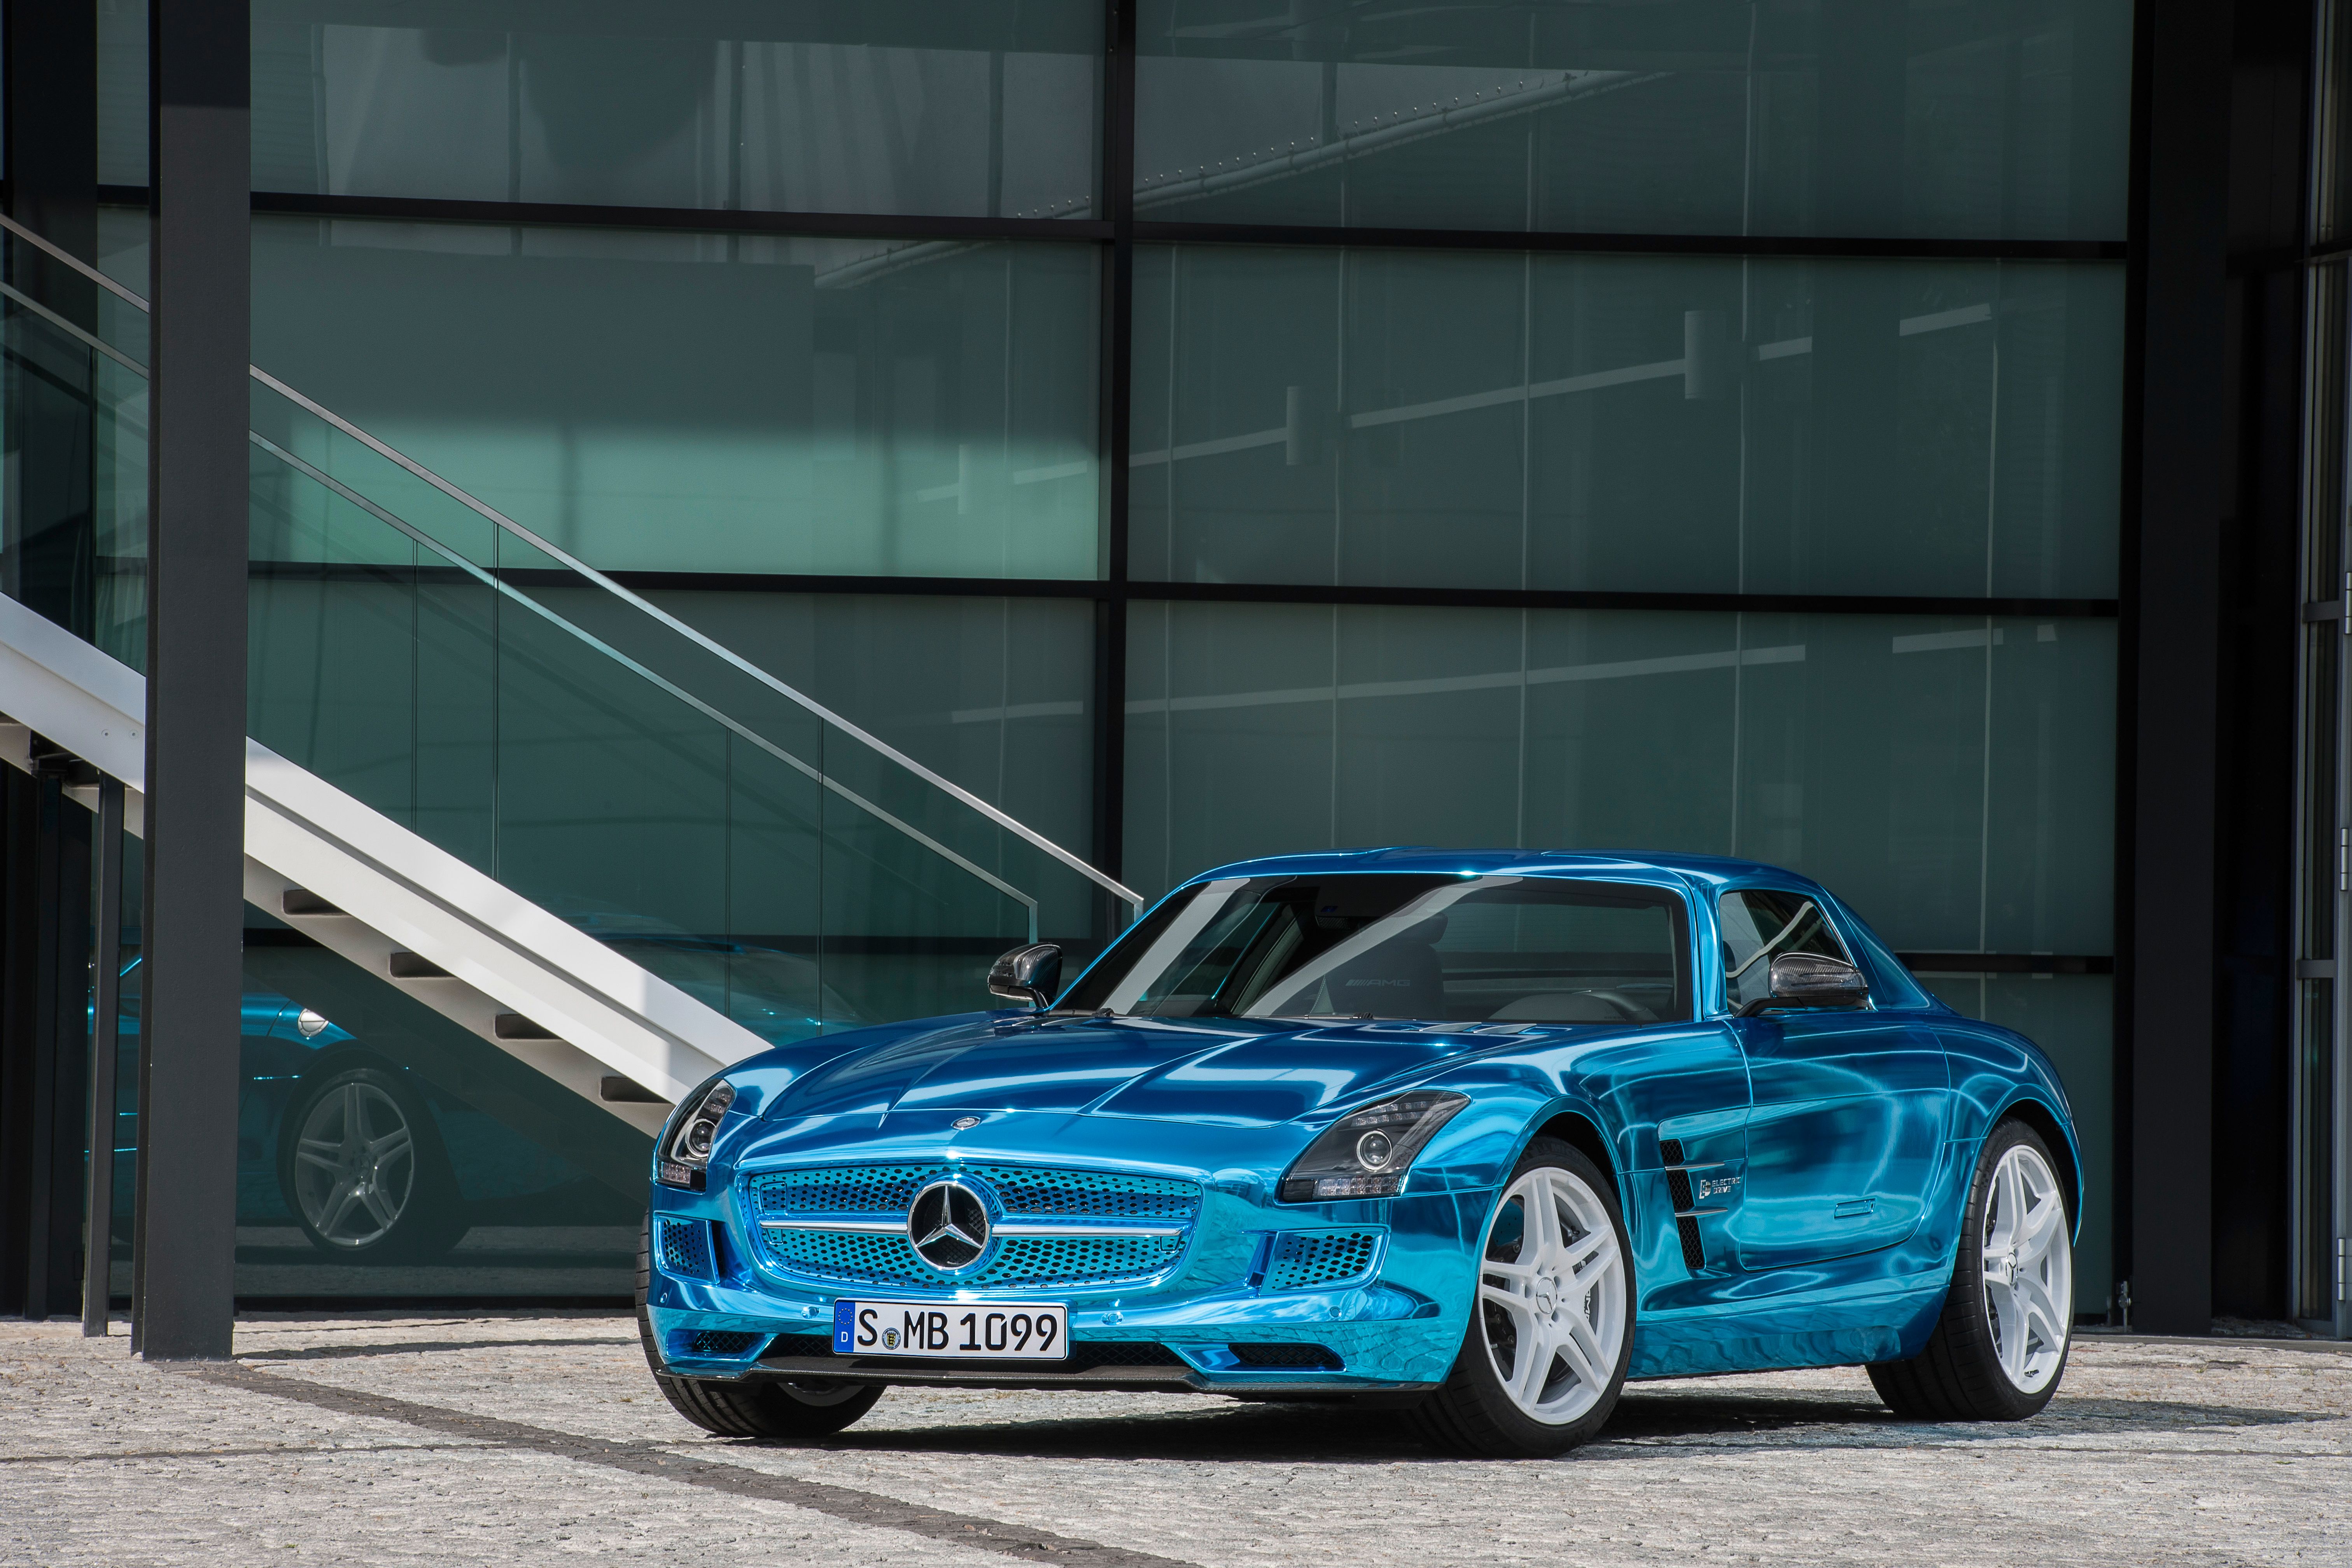 2013 Mercedes SLS AMG Coupe Electric Drive